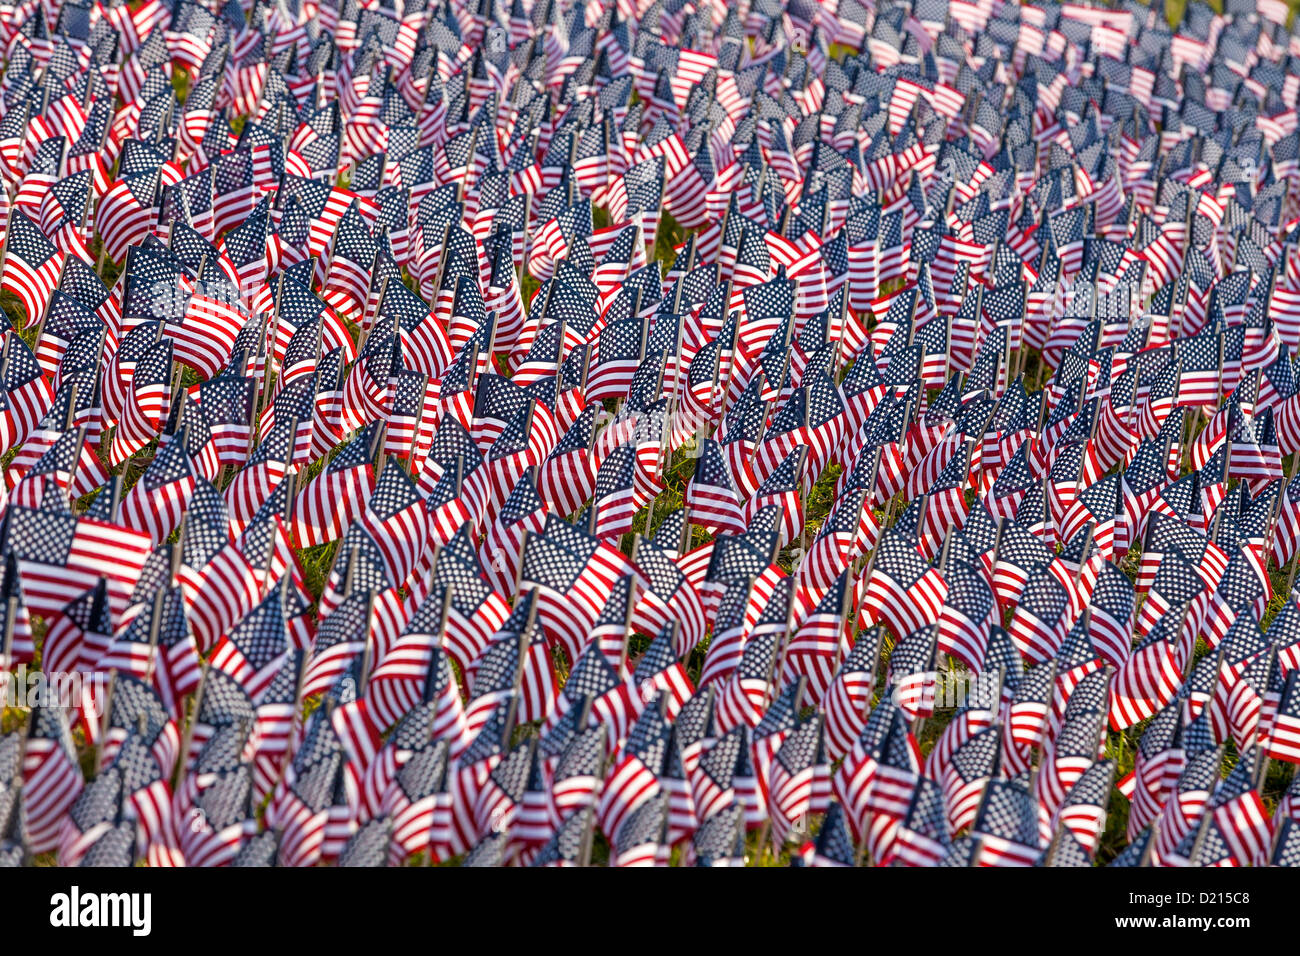 Hundreds of American Flags planted in a field. Stock Photo